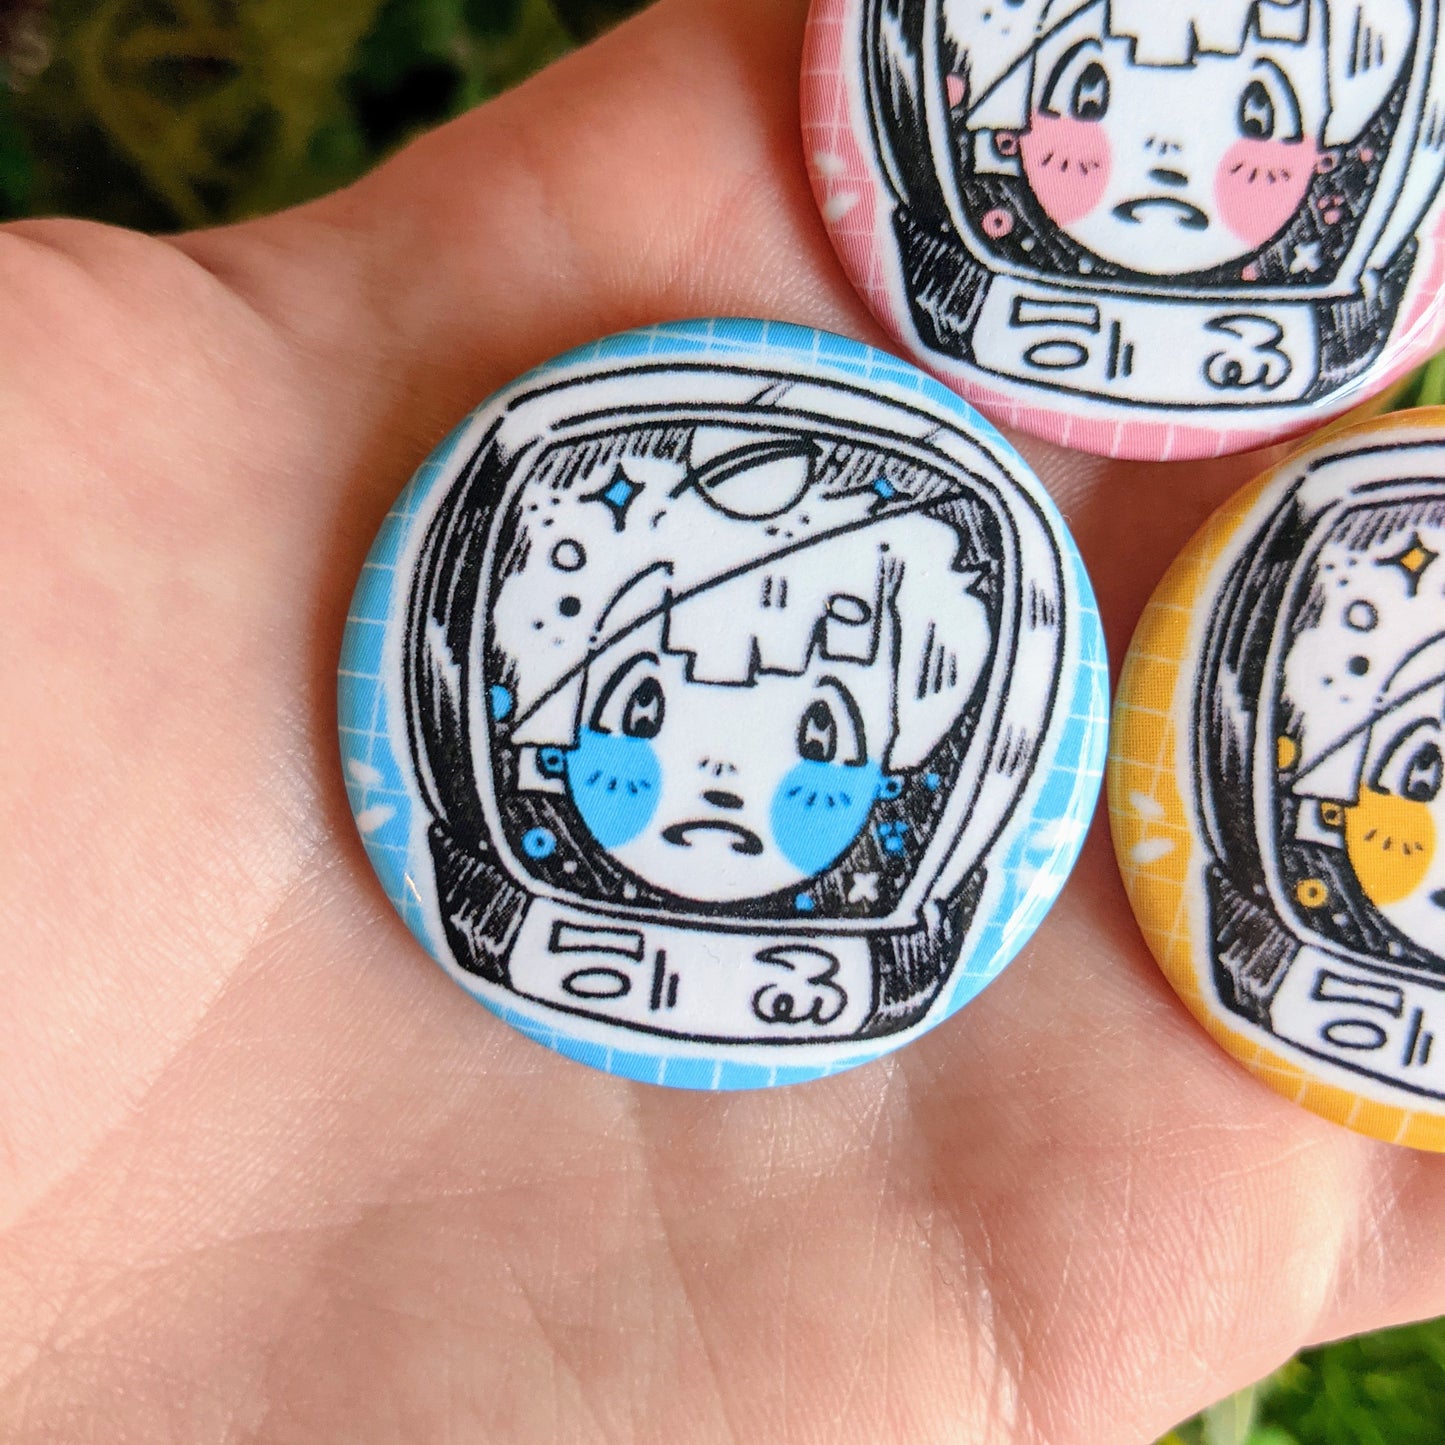 Space Girl Matching Buttons  1.5 inch - MilkyTomato